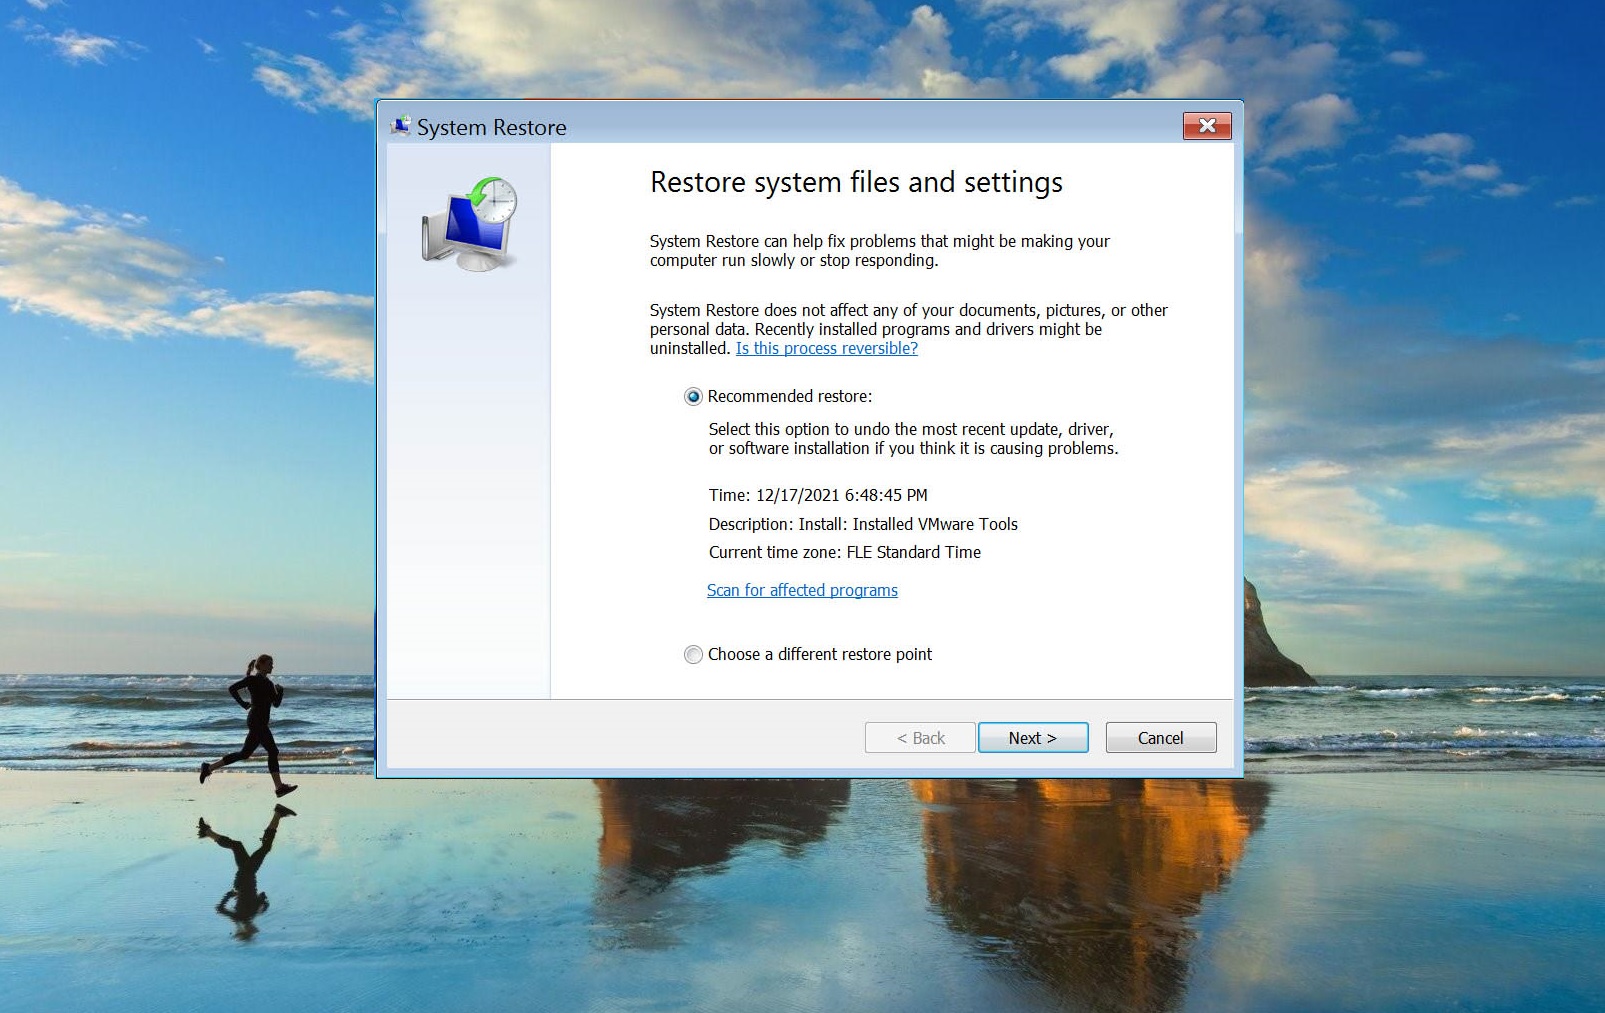 Windows 7 System Restore: A Simple Fix for PC Problems